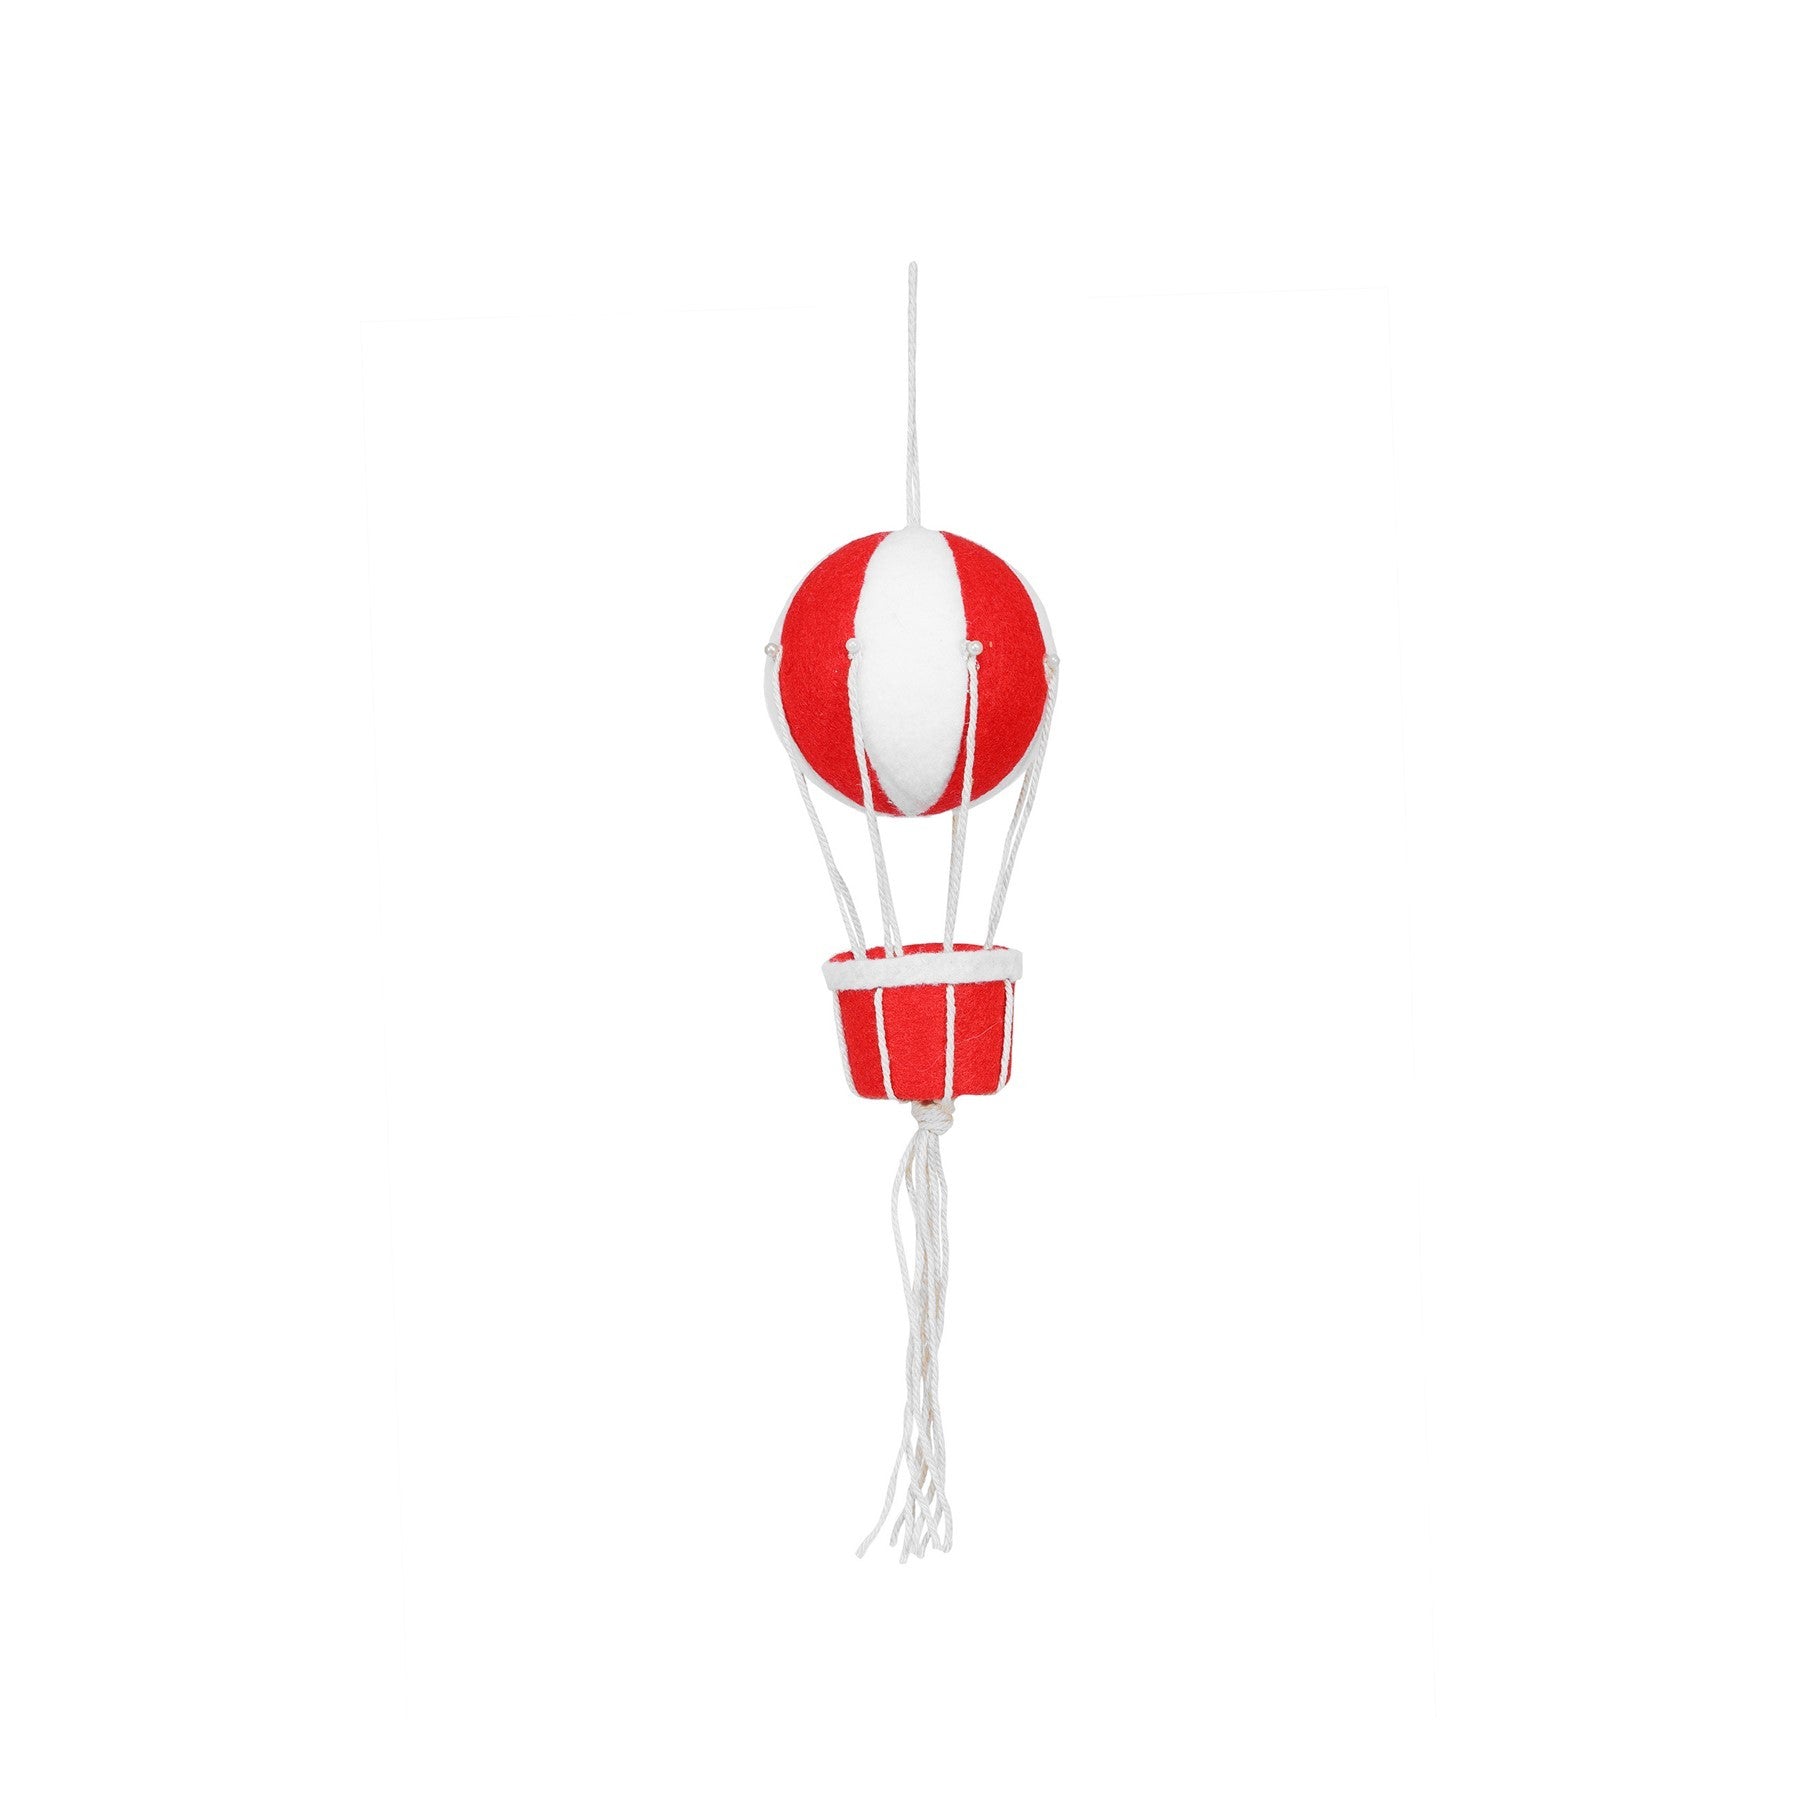 View Hanging Hot Air Balloon Decoration 28cm information